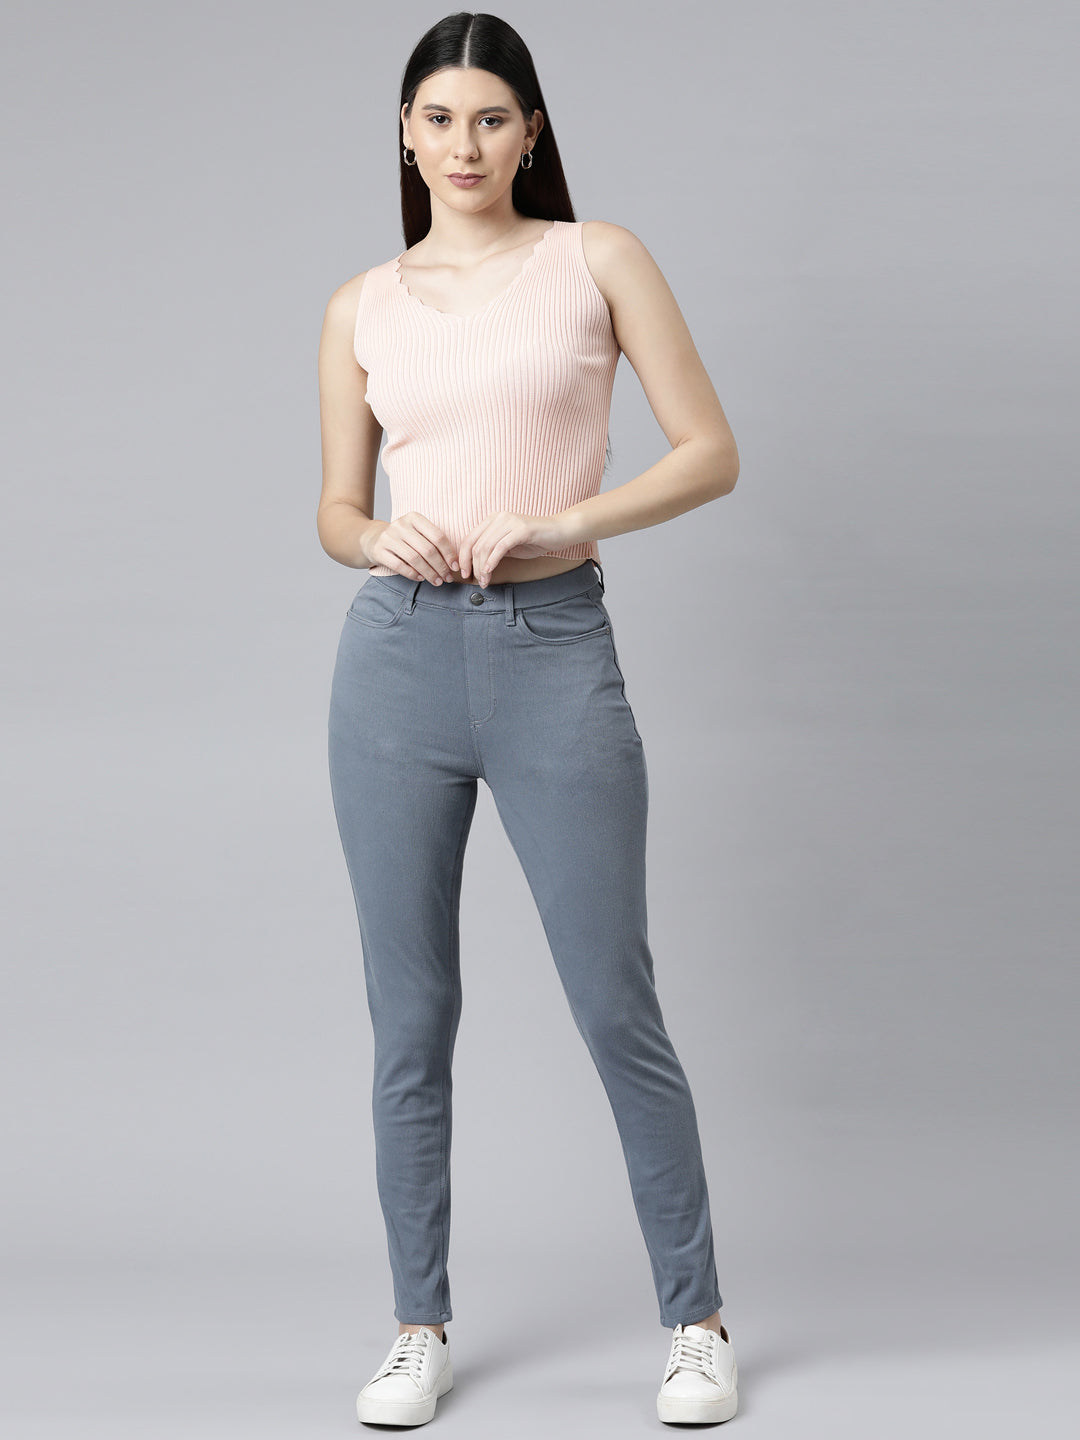 Buy GO COLORS Women Solid Beige Super Stretch Jeggings at